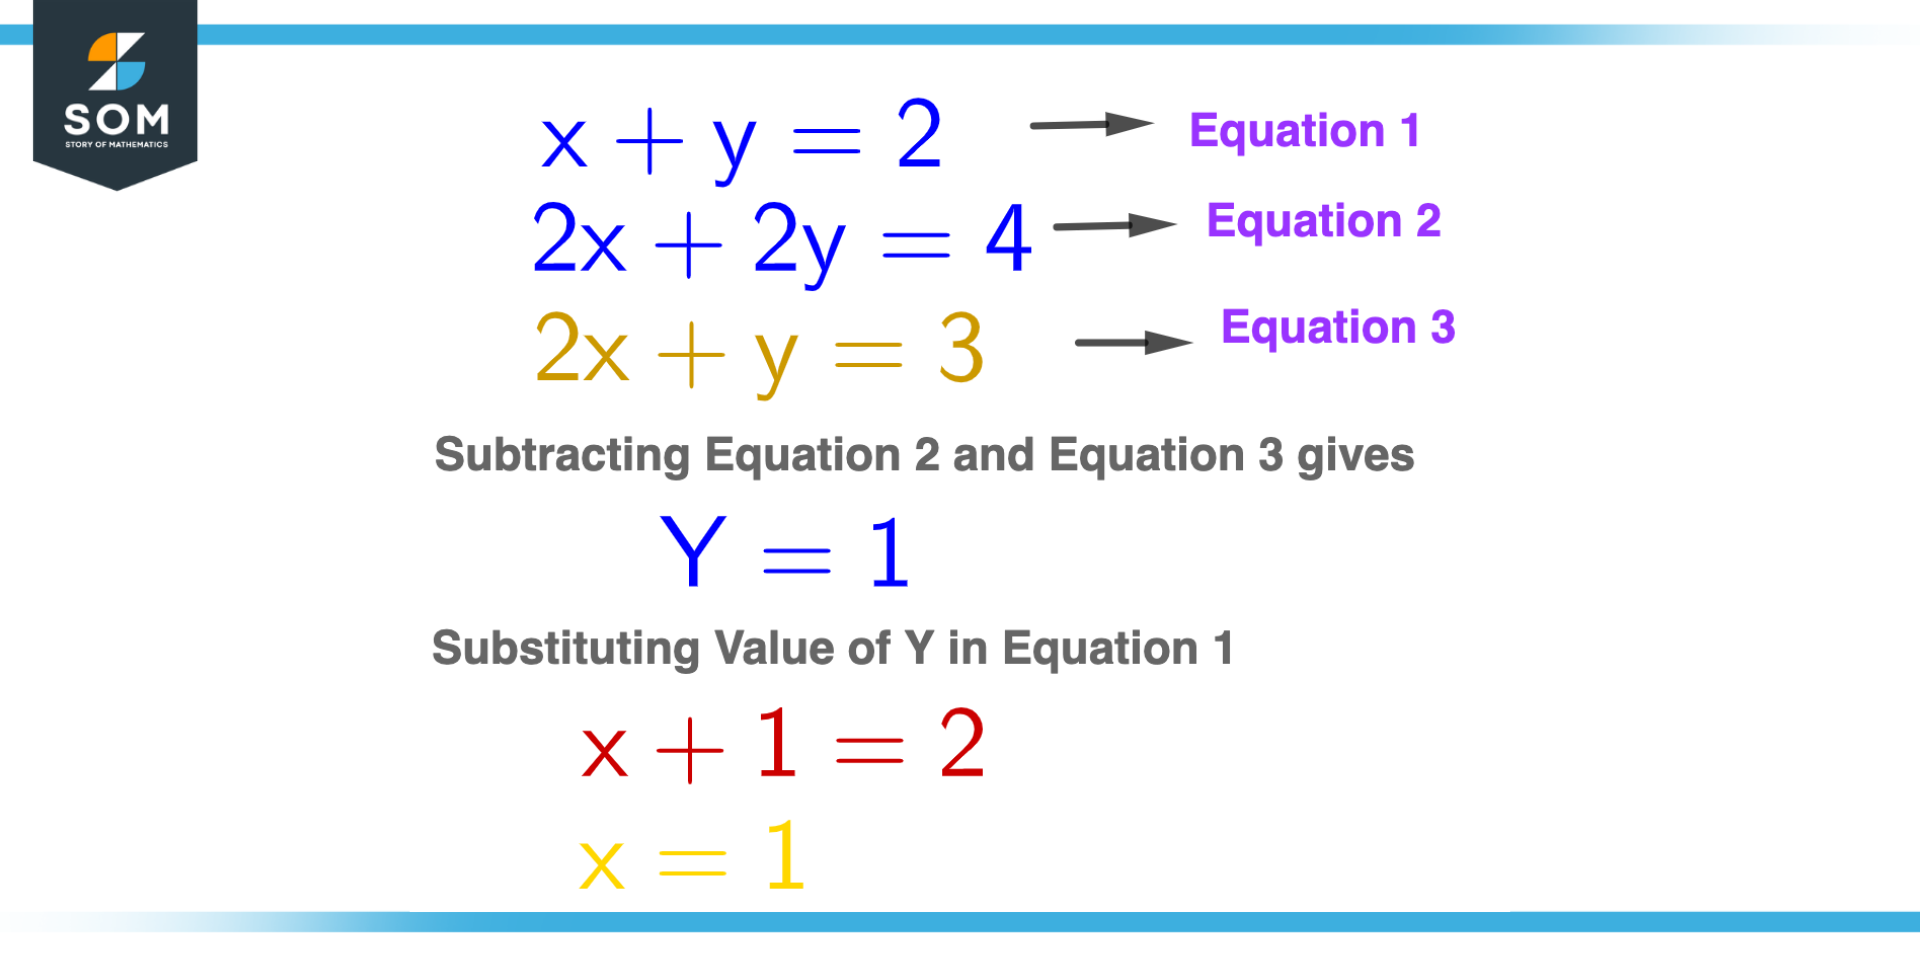 Substituting Value of Variable Y in Equation